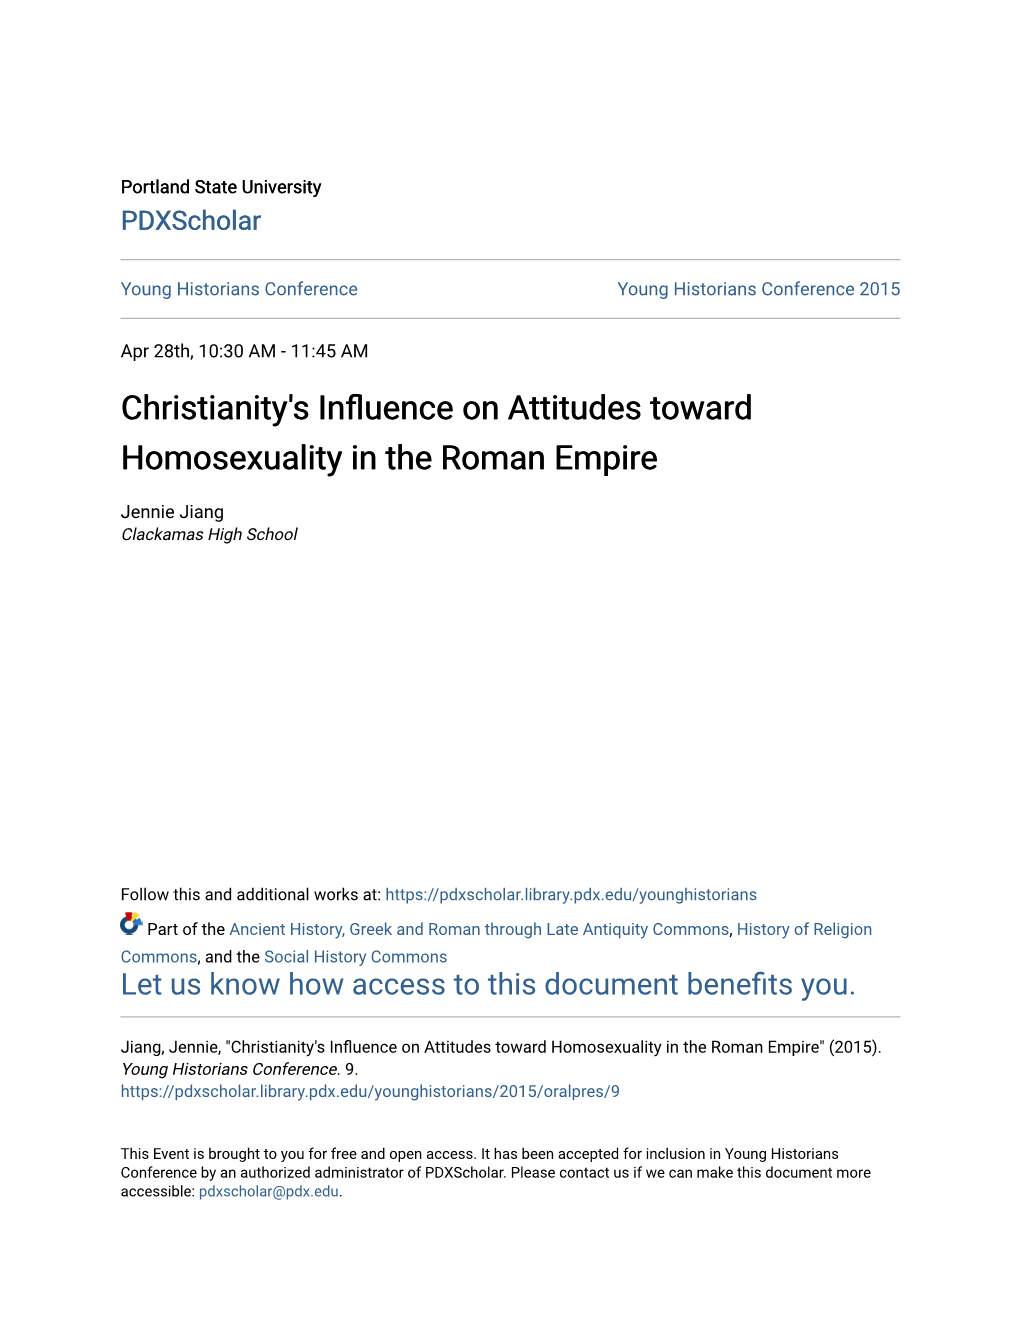 Christianity's Influence on Attitudes Toward Homosexuality in the Roman Empire" (2015)